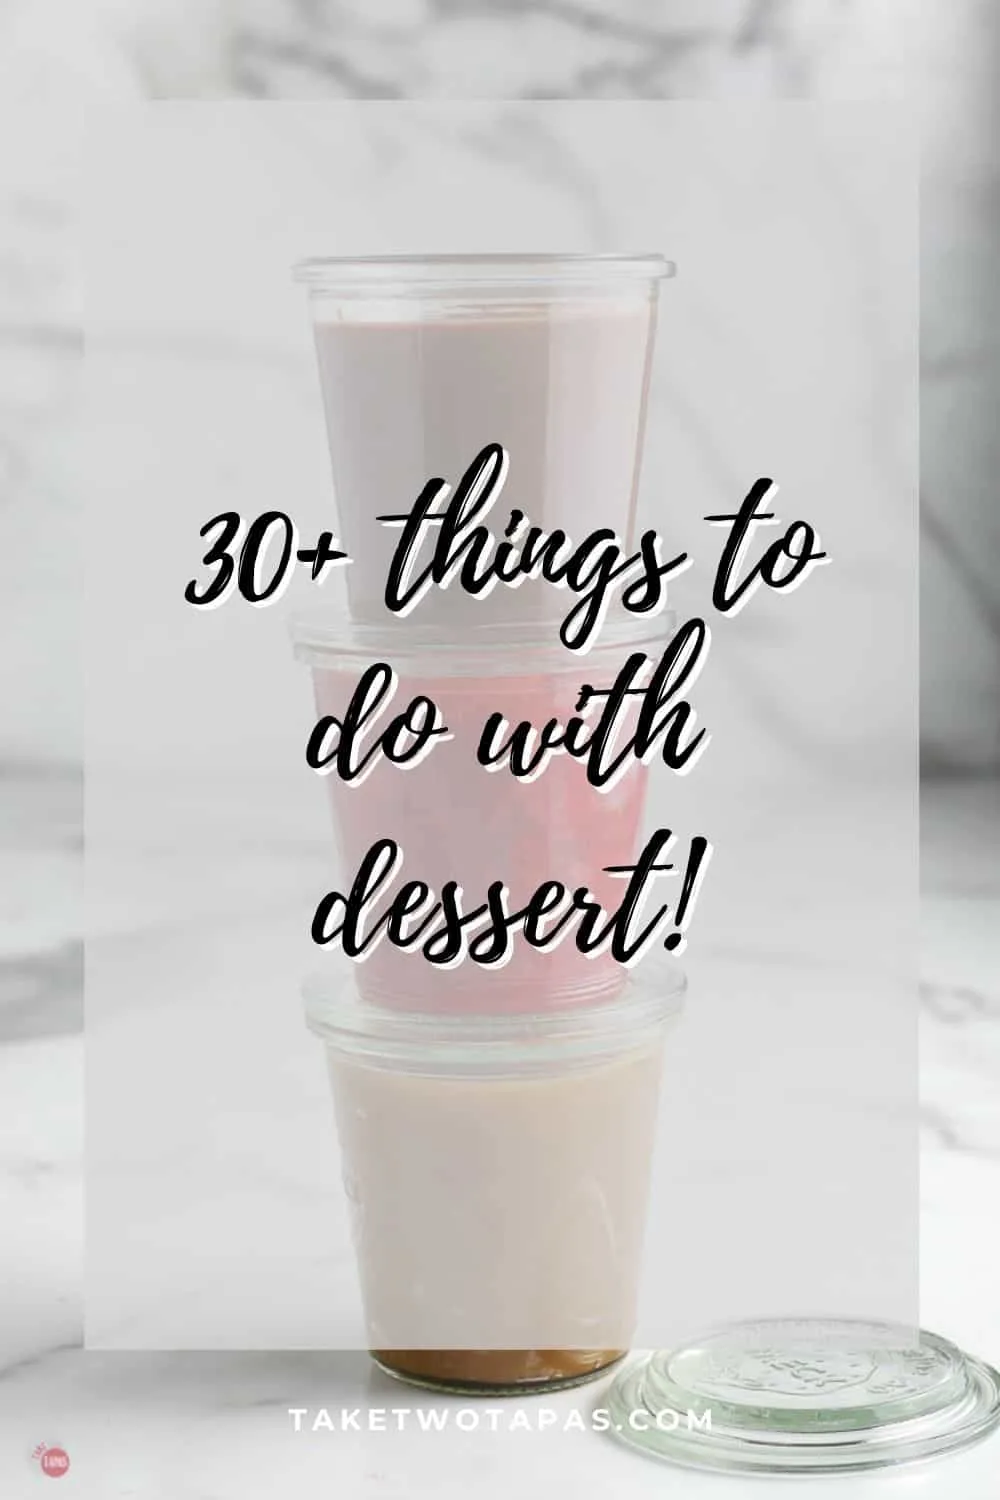 pic of sauces with text "30+ things to do with dessert"